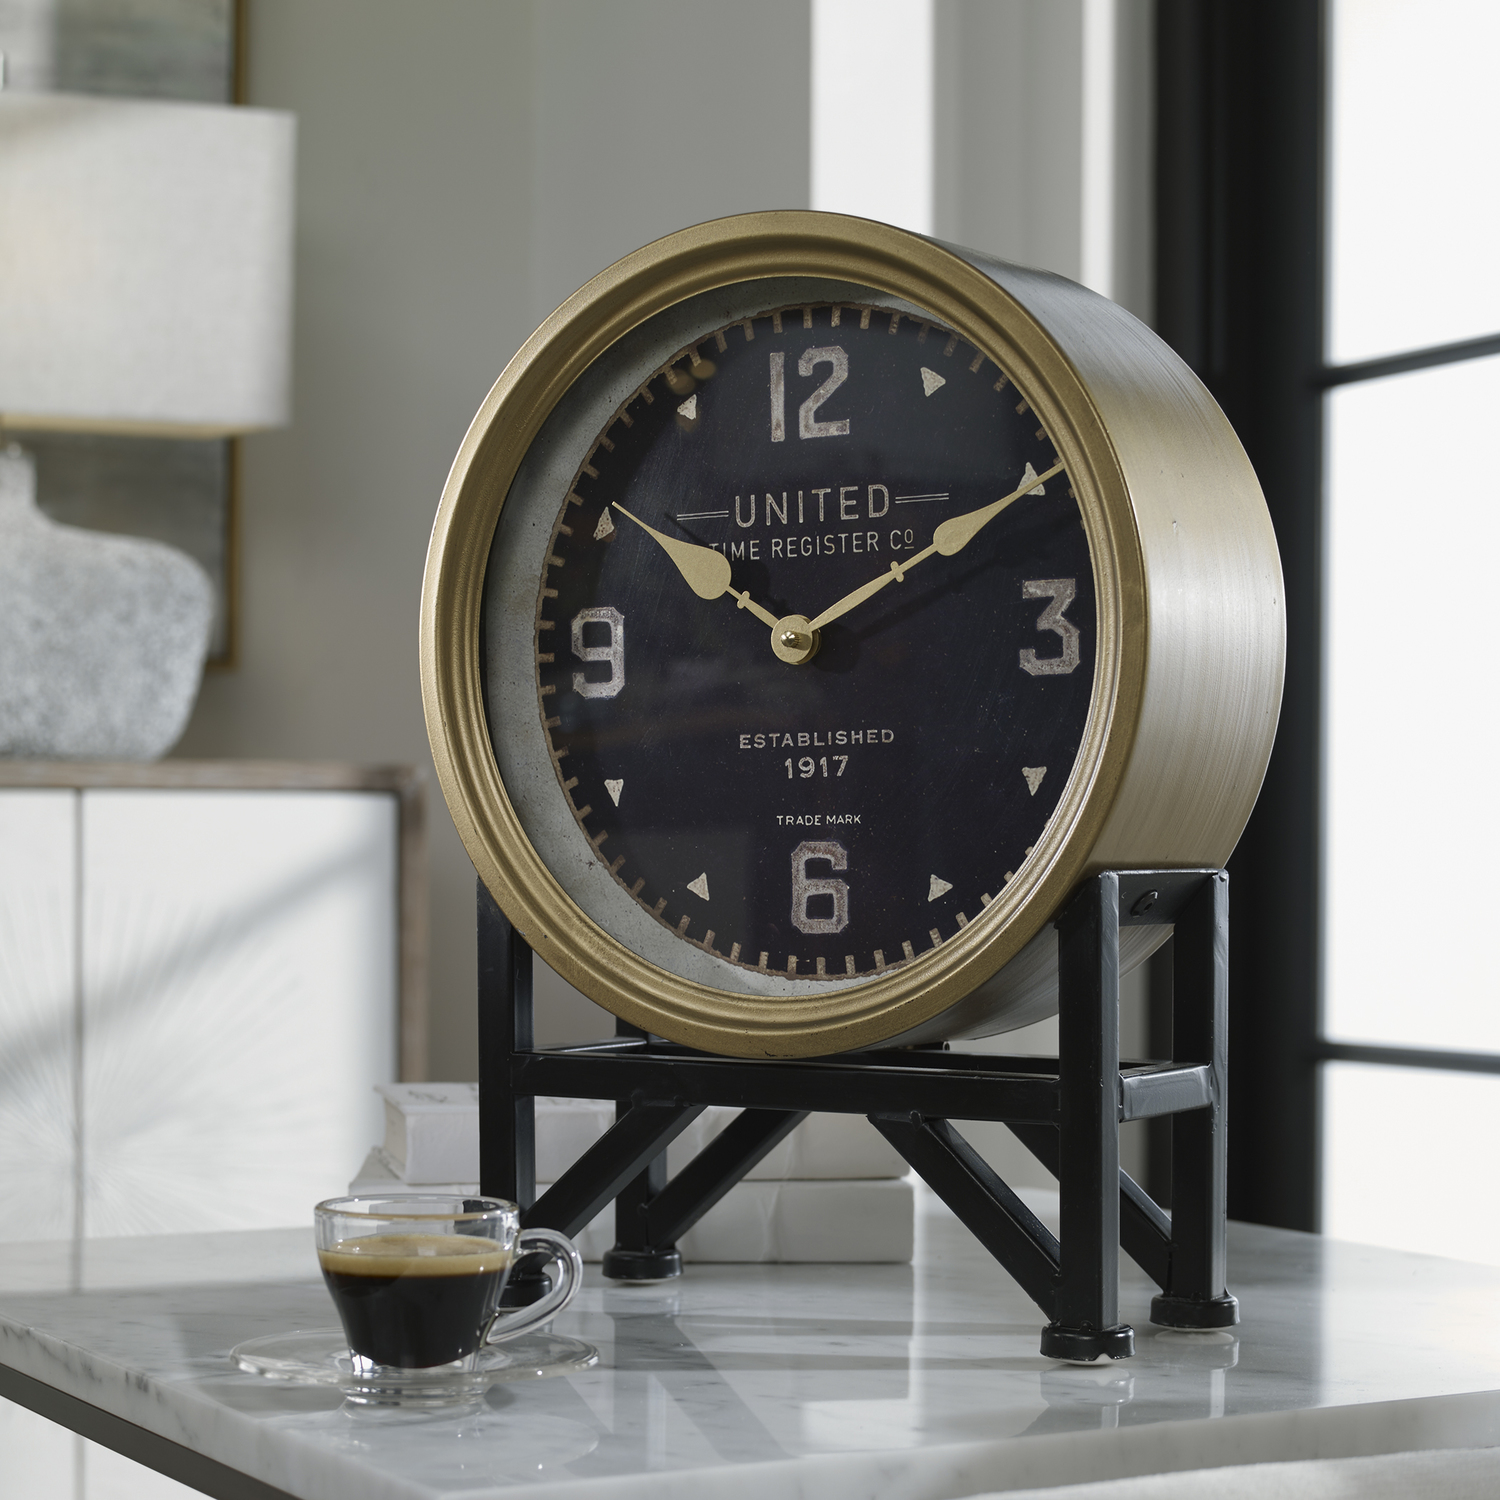 27 in wall clock Uttermost Table Clocks Brass Finished Metal With Aged Black Details. Quartz Movement Ensures Accurate Timekeeping. Requires One "AA" Battery. Steve Kowalski